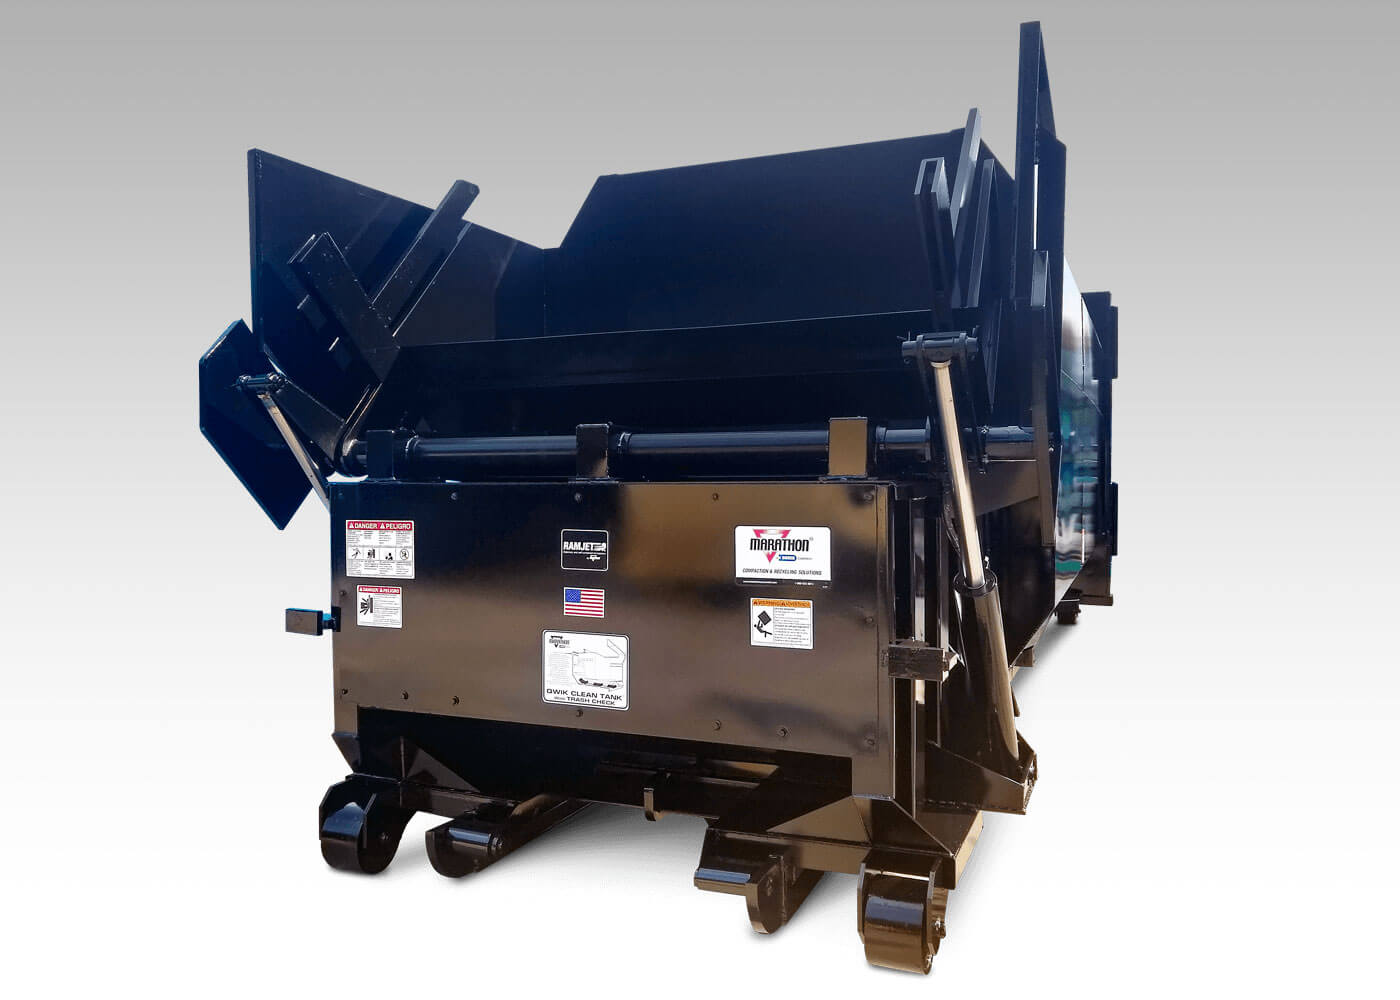 Marathon RJ-250WD self contained trash compactor for commercial compaction with hydraulic container pickup lifter